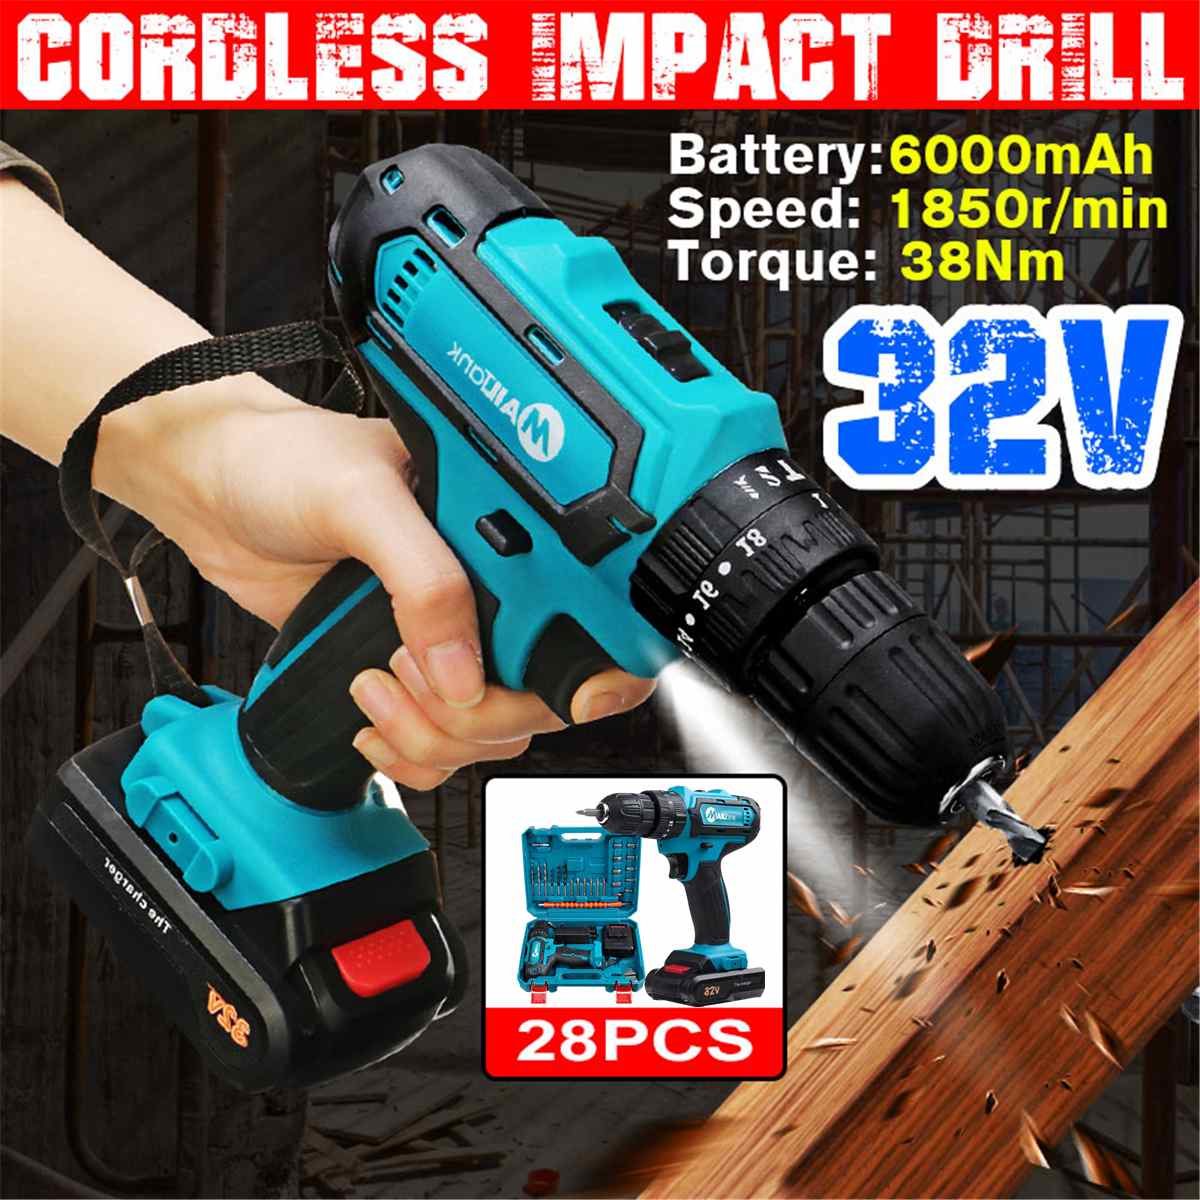 3 In 1 32V Cordless Electric Drill Hammer Screwdriver 2 Speed LED Lighting Impact Drill with Battery 38Nm 18+3 Torque Power Tool